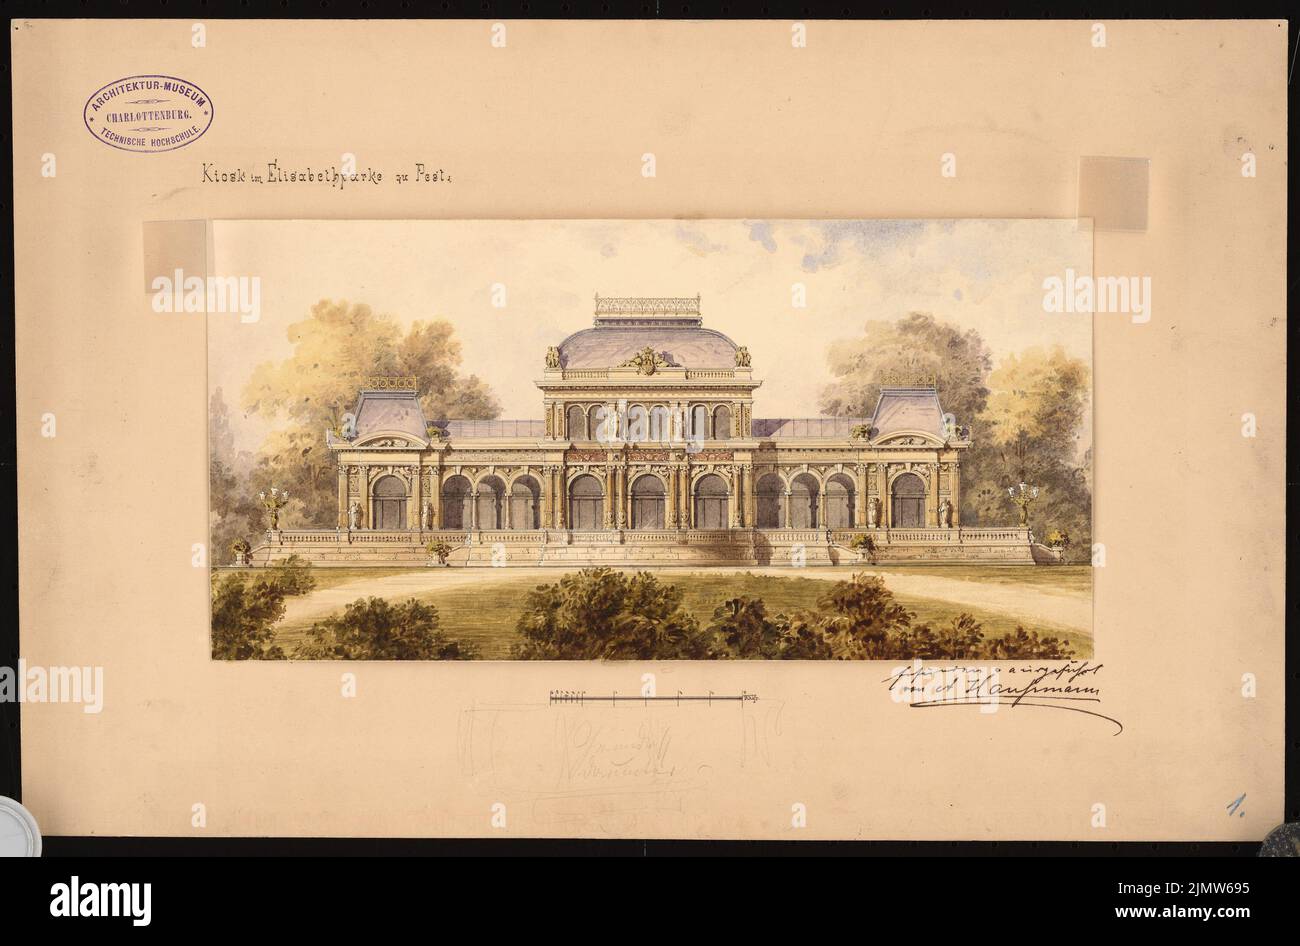 Hauszmann Alajos (1847-1926), kiosk in the Elisabethpark in Pest (1870-1890): View. Watercolor on the box, 29.9 x 45.3 cm (including scan edges) Hauszmann Alajos  (1847-1926): Kiosk im Elisabethpark, Pest Stock Photo